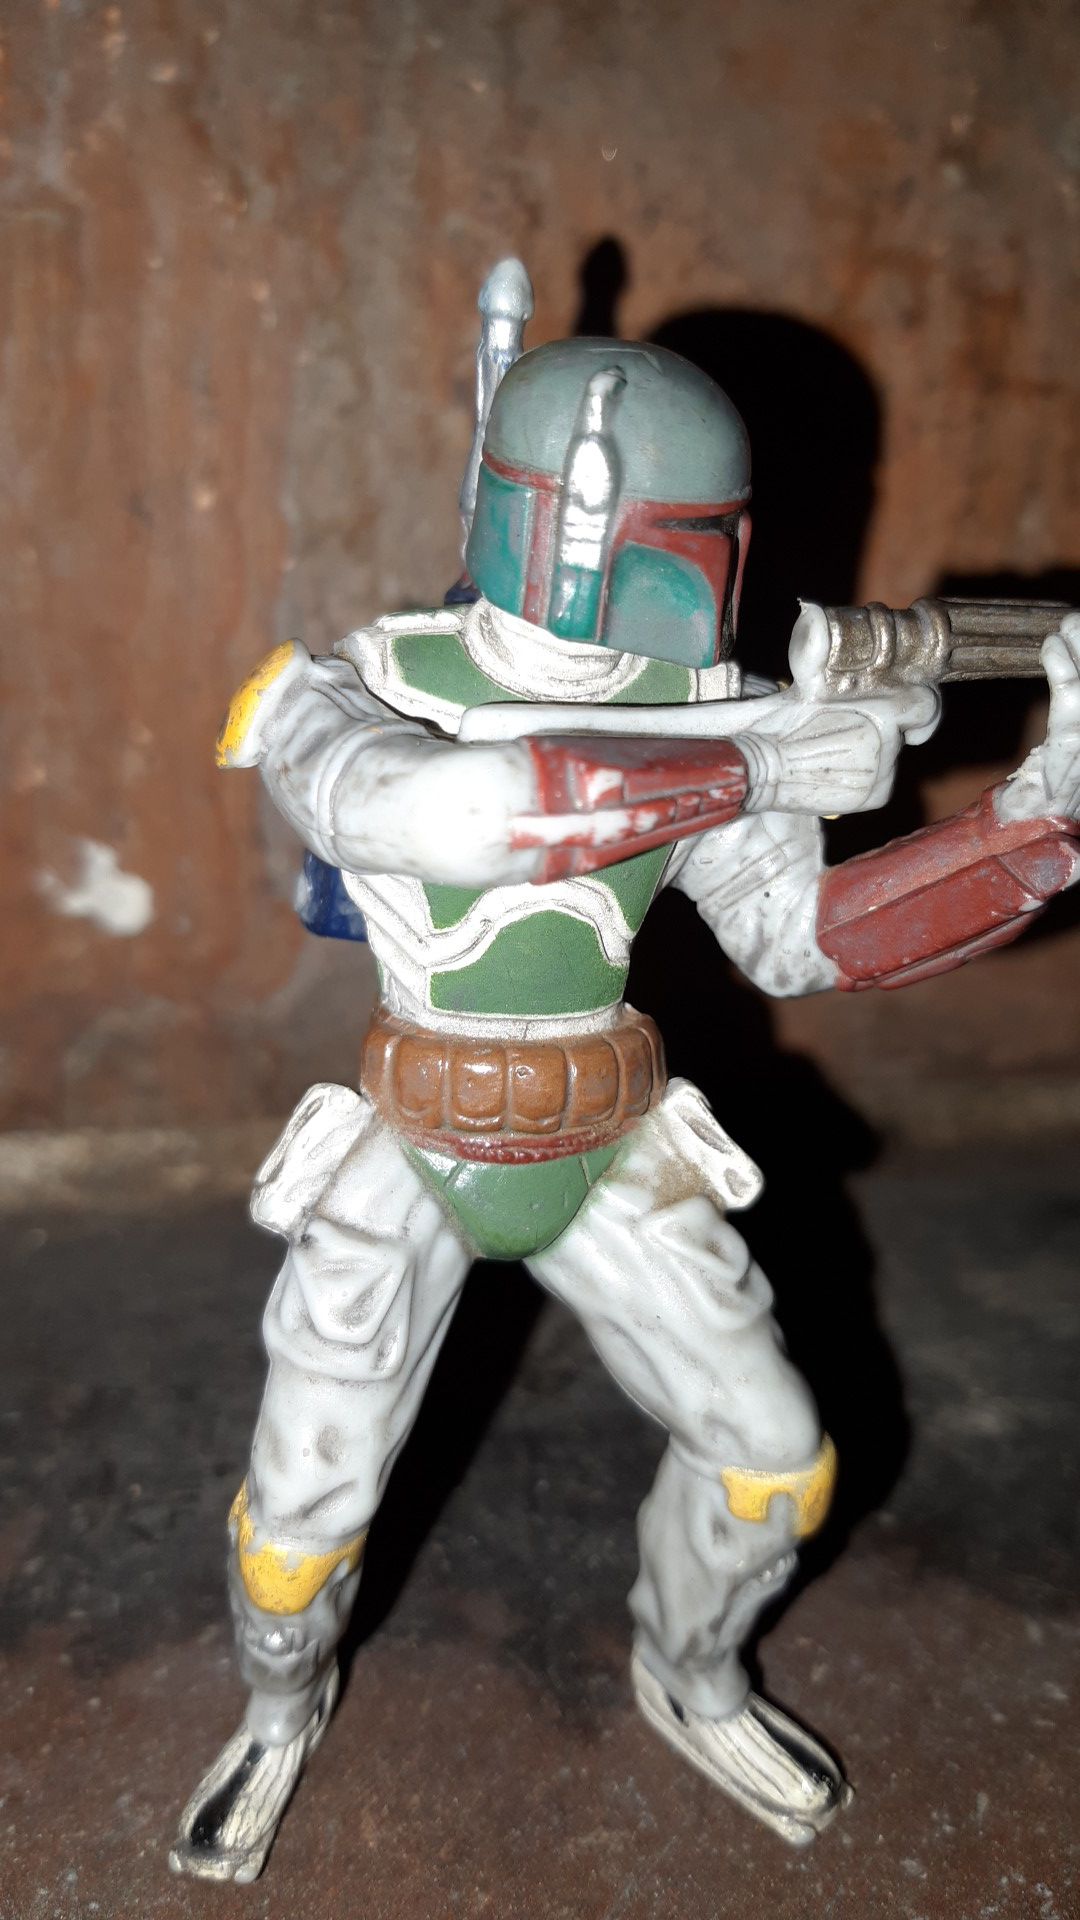 Star Wars Boba Fett PVC Collectible Figurine (2007) Toy Figure Distressed LFT